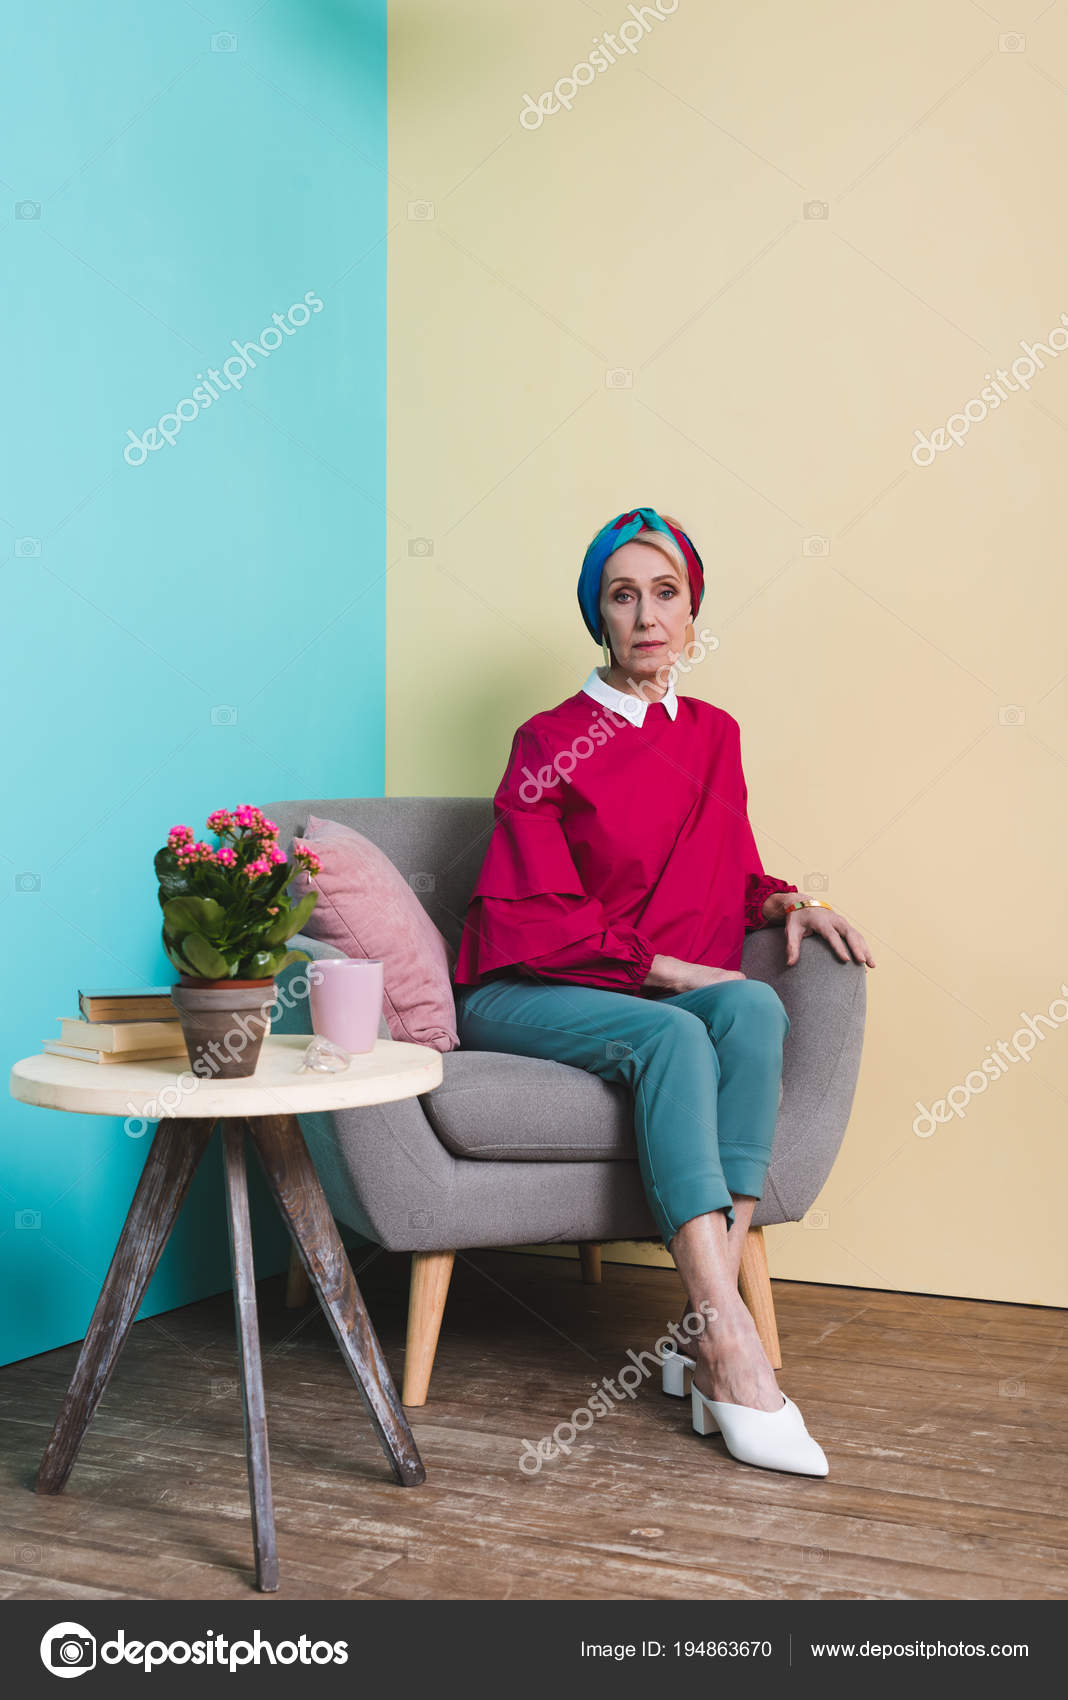 Beautiful Girl Sitting in a Vintage Armchair Stock Photo - Image of  interior, elegant: 93090162